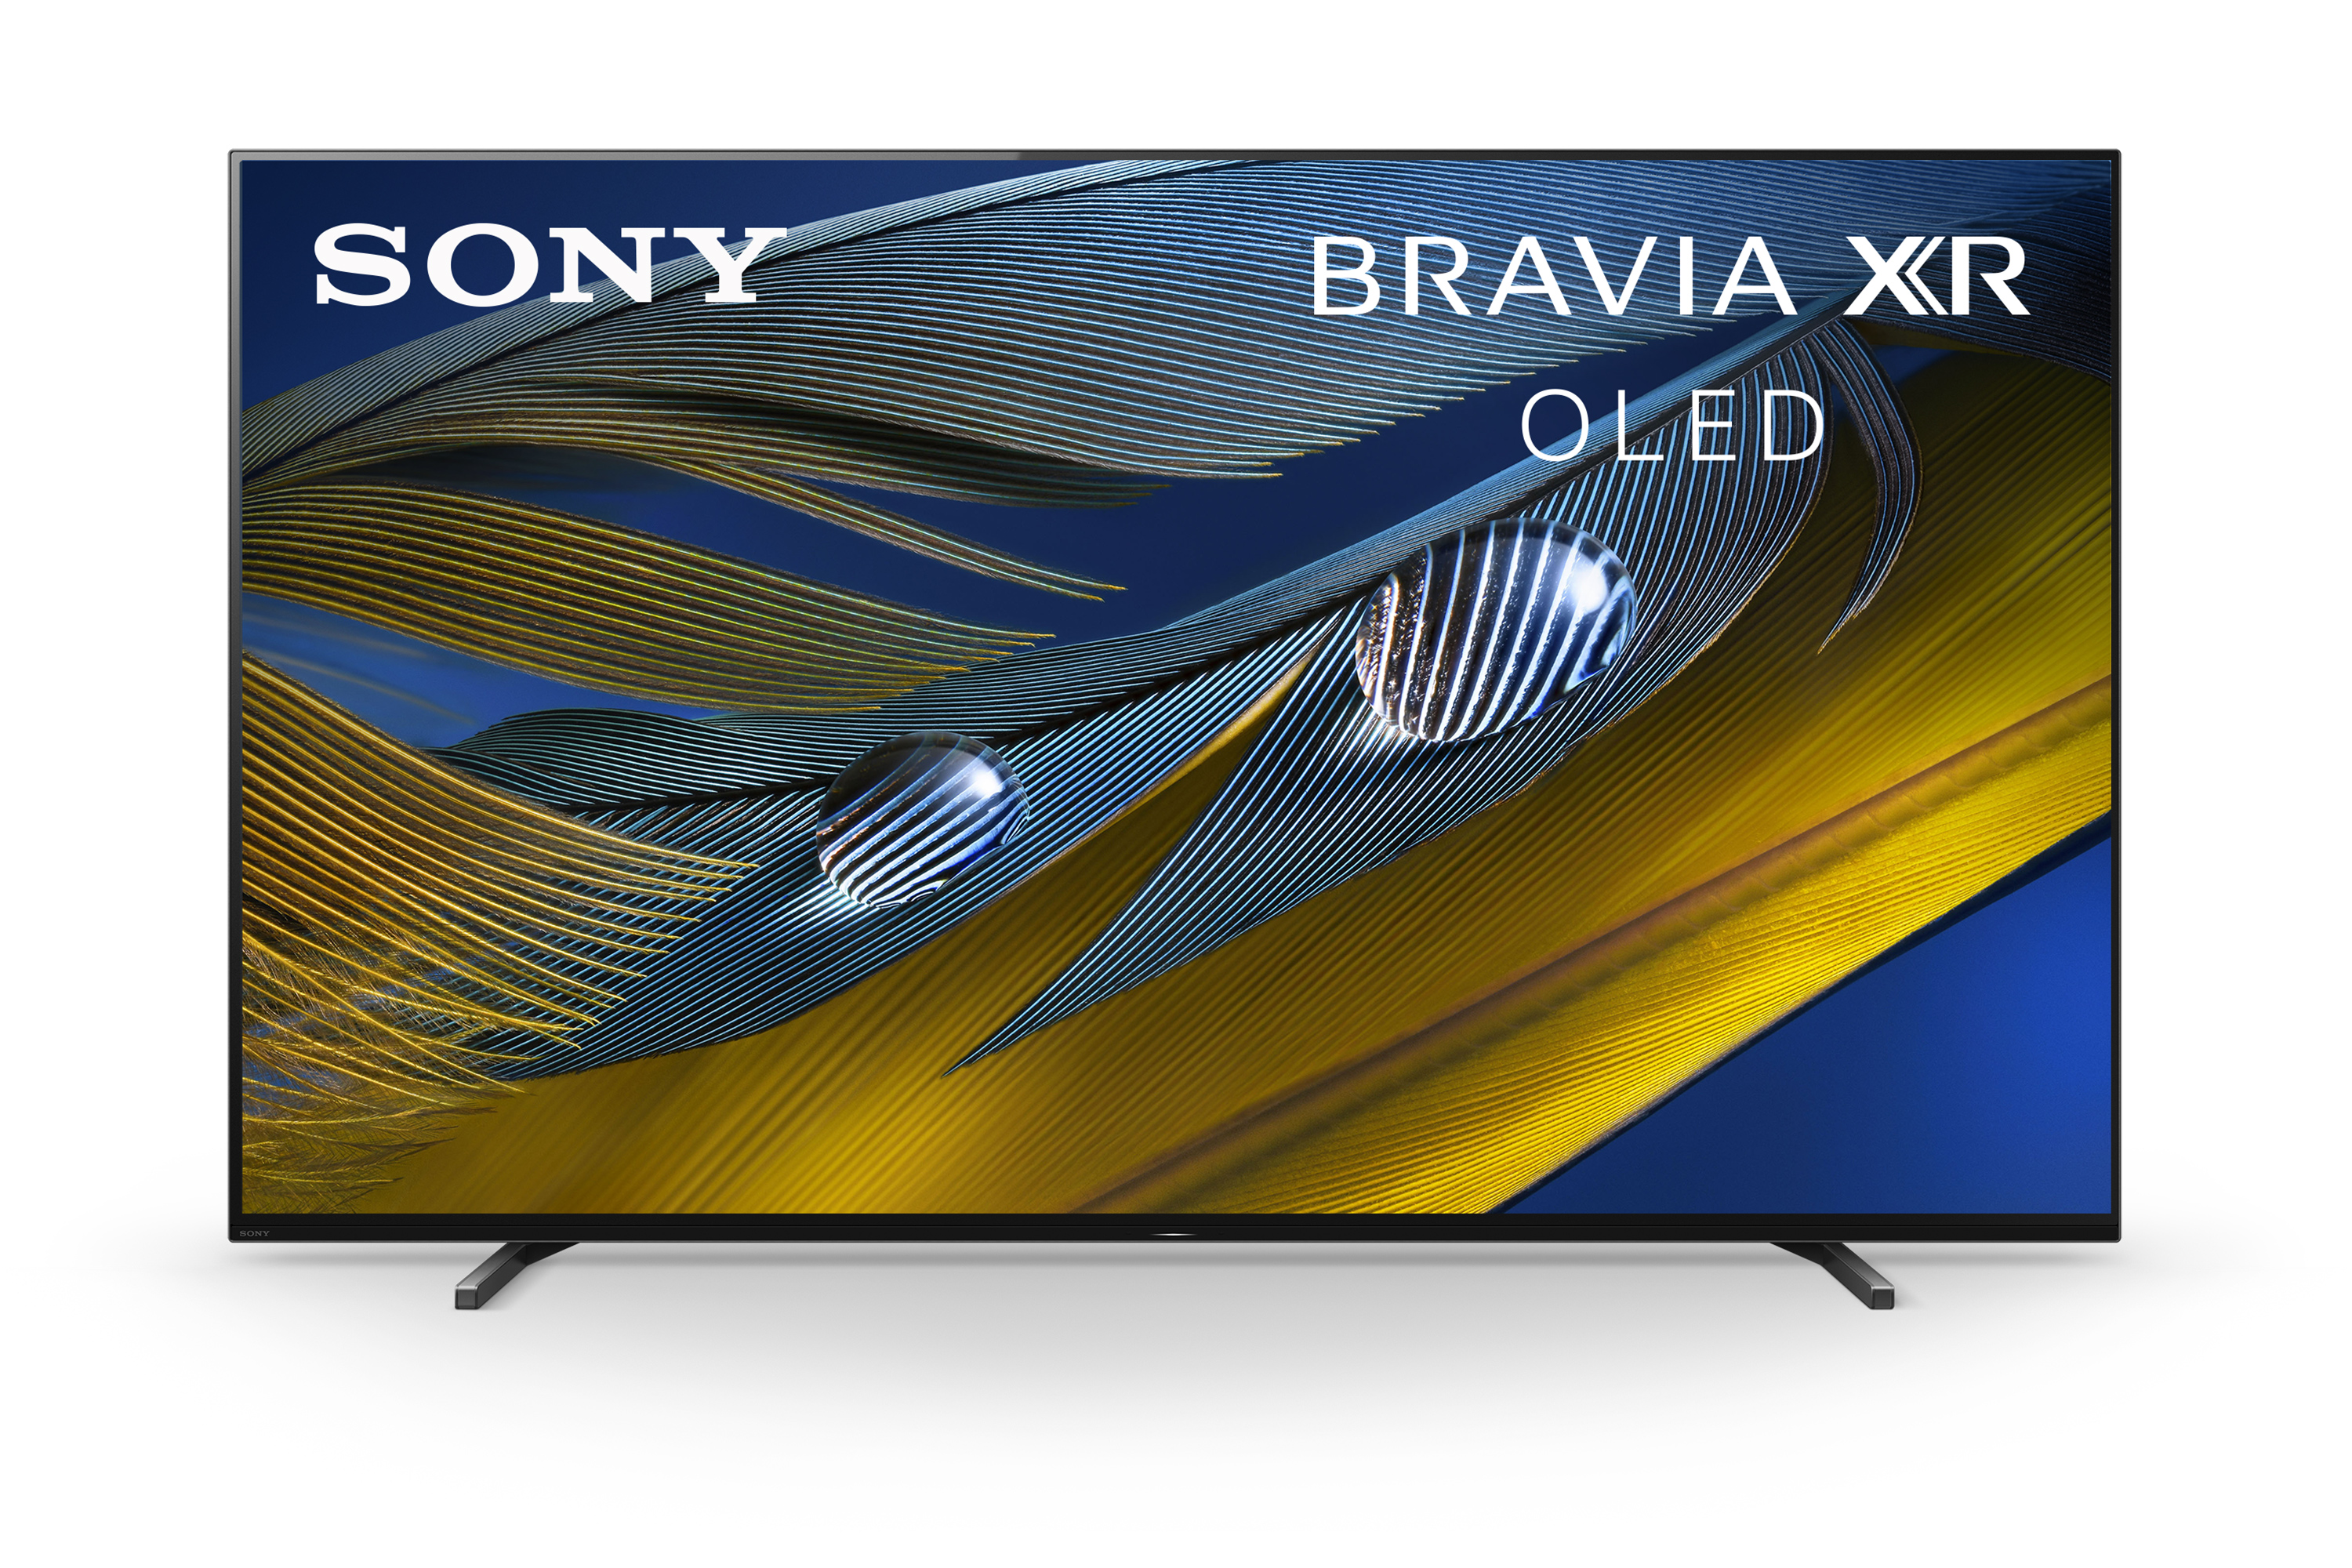 Sony 55” Class XR55A80J BRAVIA XR OLED 4K Ultra HD Smart Google TV with Dolby Vision HDR A80J Series- 2021 Model - image 1 of 22